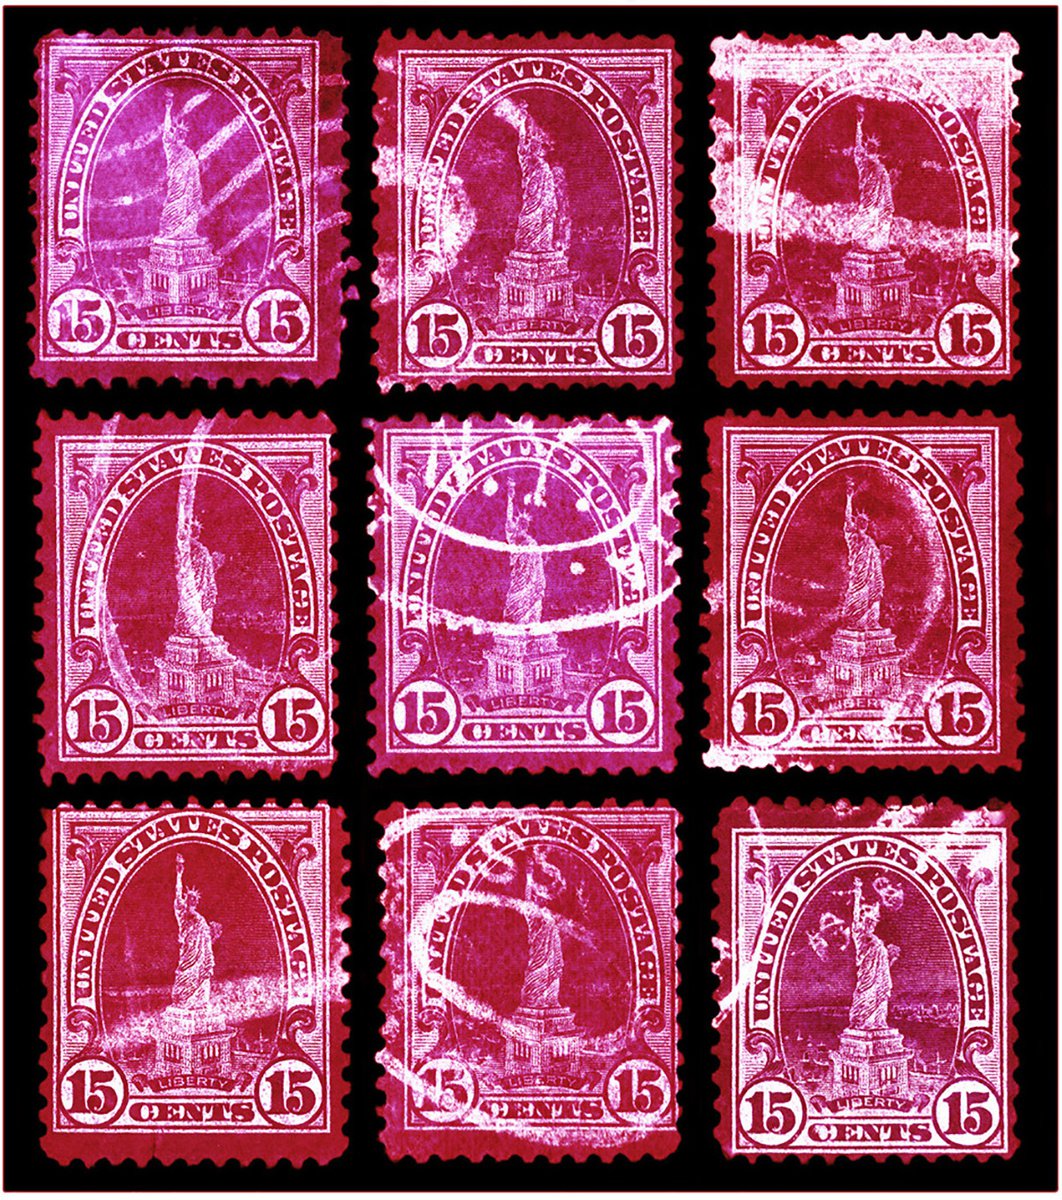 Heidler & Heeps American Stamp Collection ’Liberty’ Magenta Mosaic by Richard Heeps